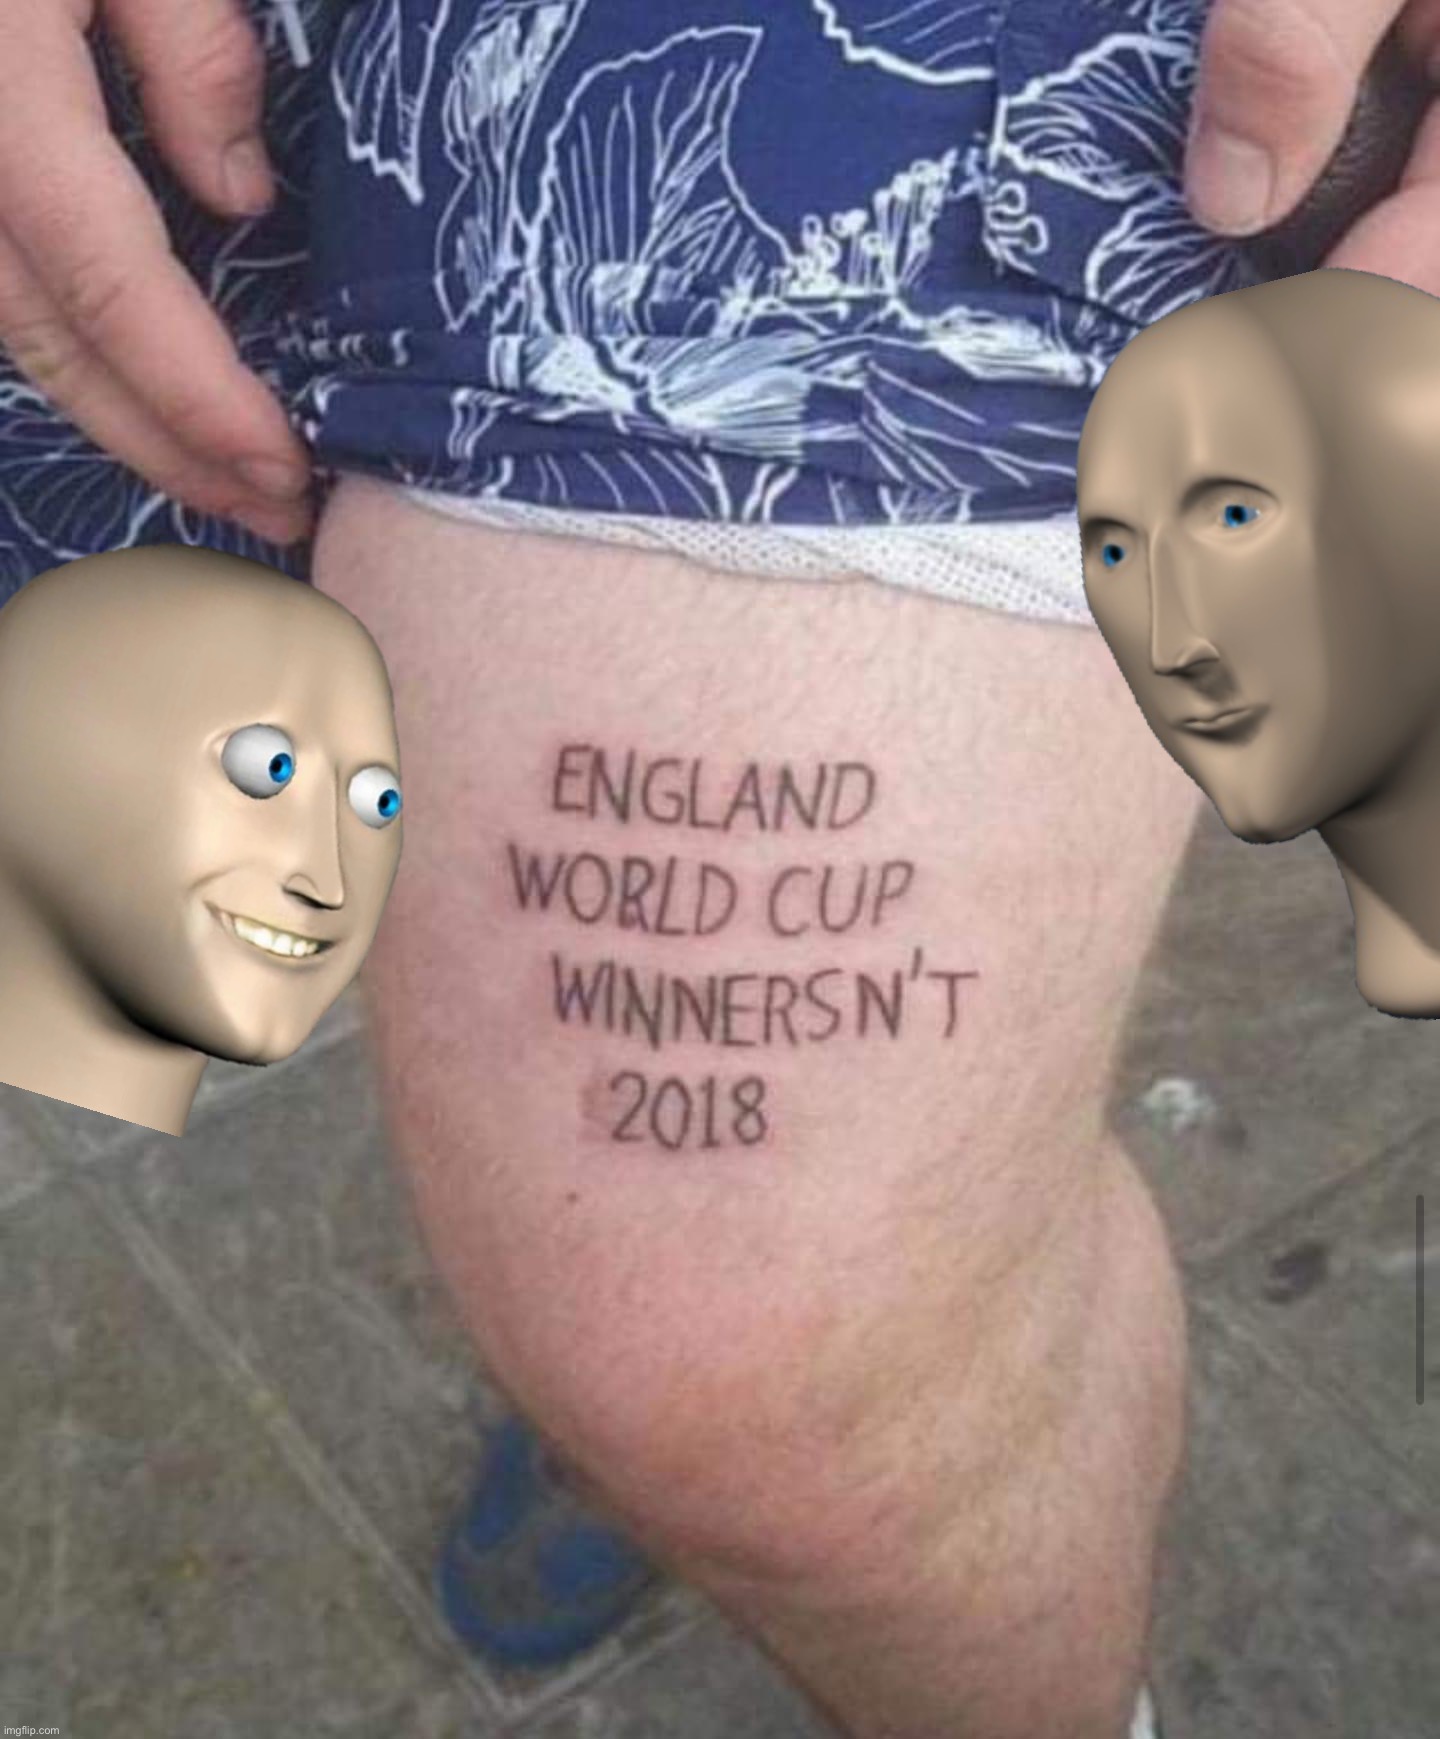 England World Cup Winnersn’t 2018 | image tagged in england world cup winnersn t 2018 | made w/ Imgflip meme maker